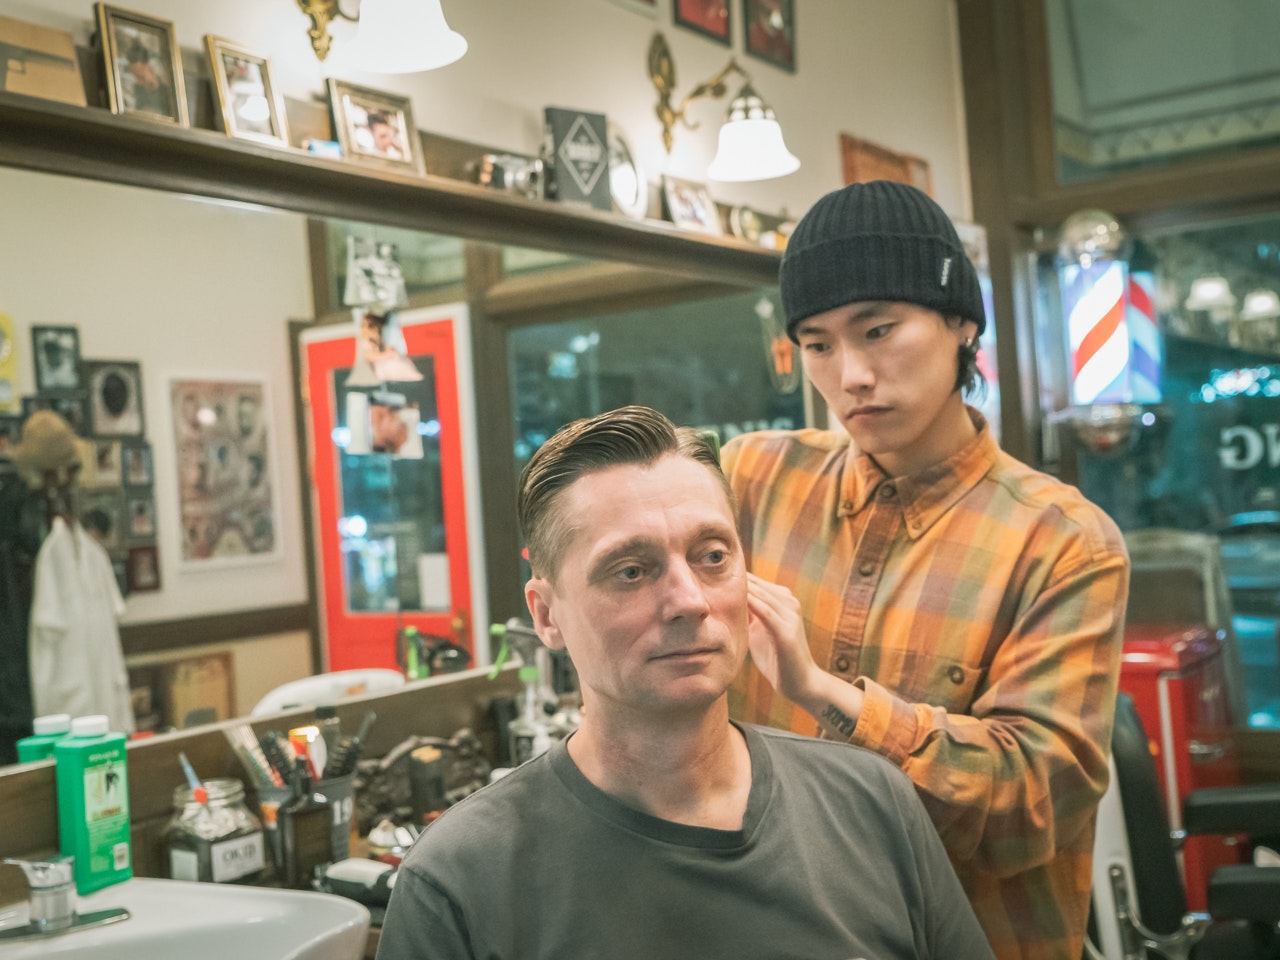 Meet Haircut Harry the YouTuber who visits barbershops around the world -  Lonely Planet